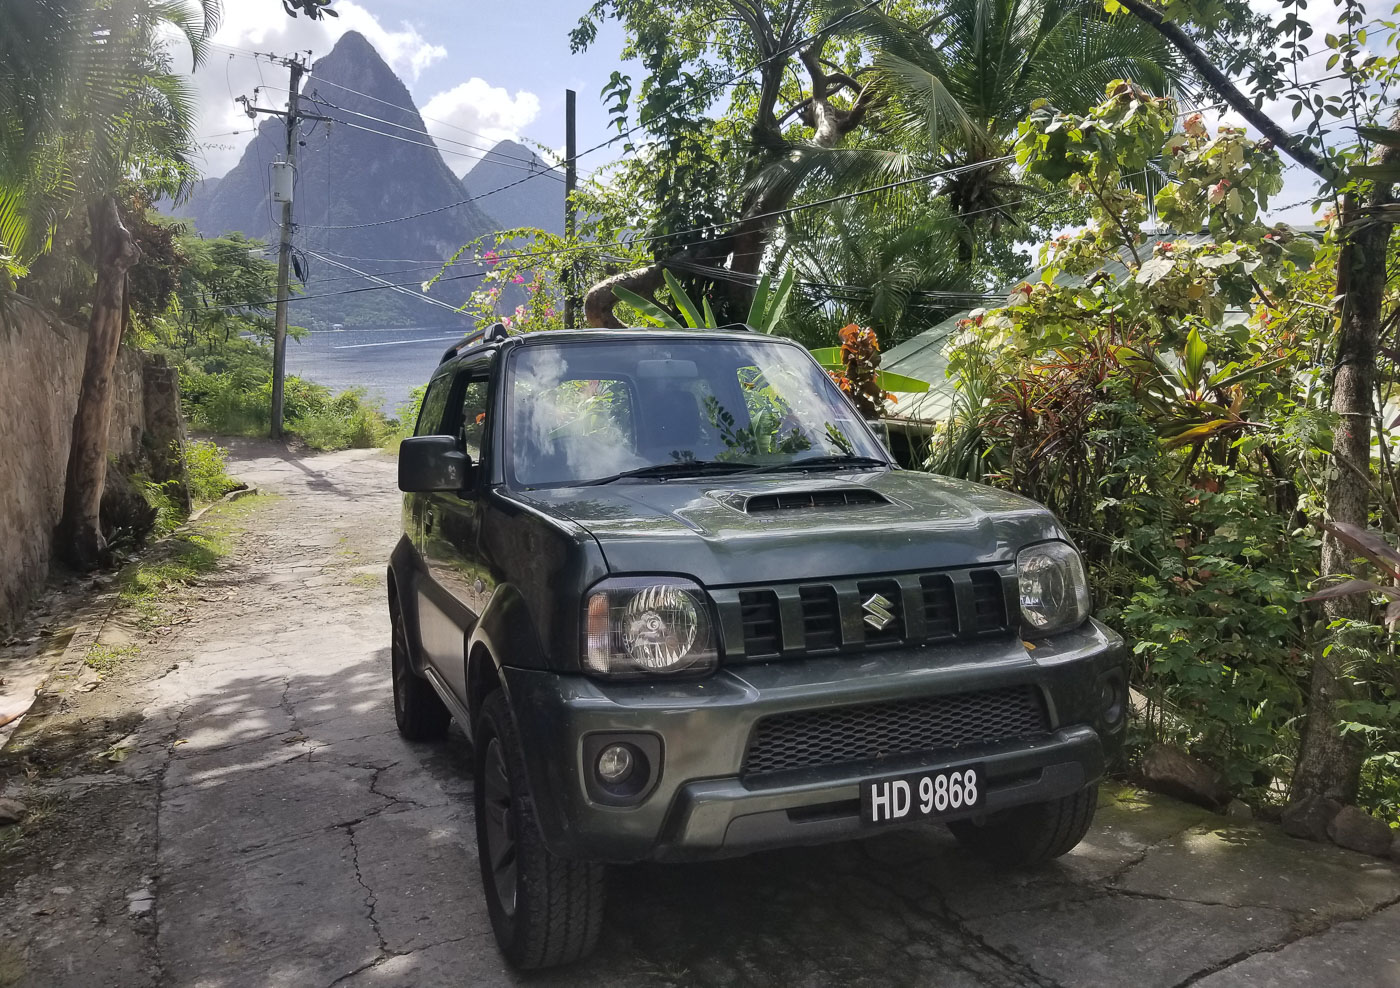 Special Feature: Honeymooning in Saint Lucia - The Enormous Picture Journal - Day 10